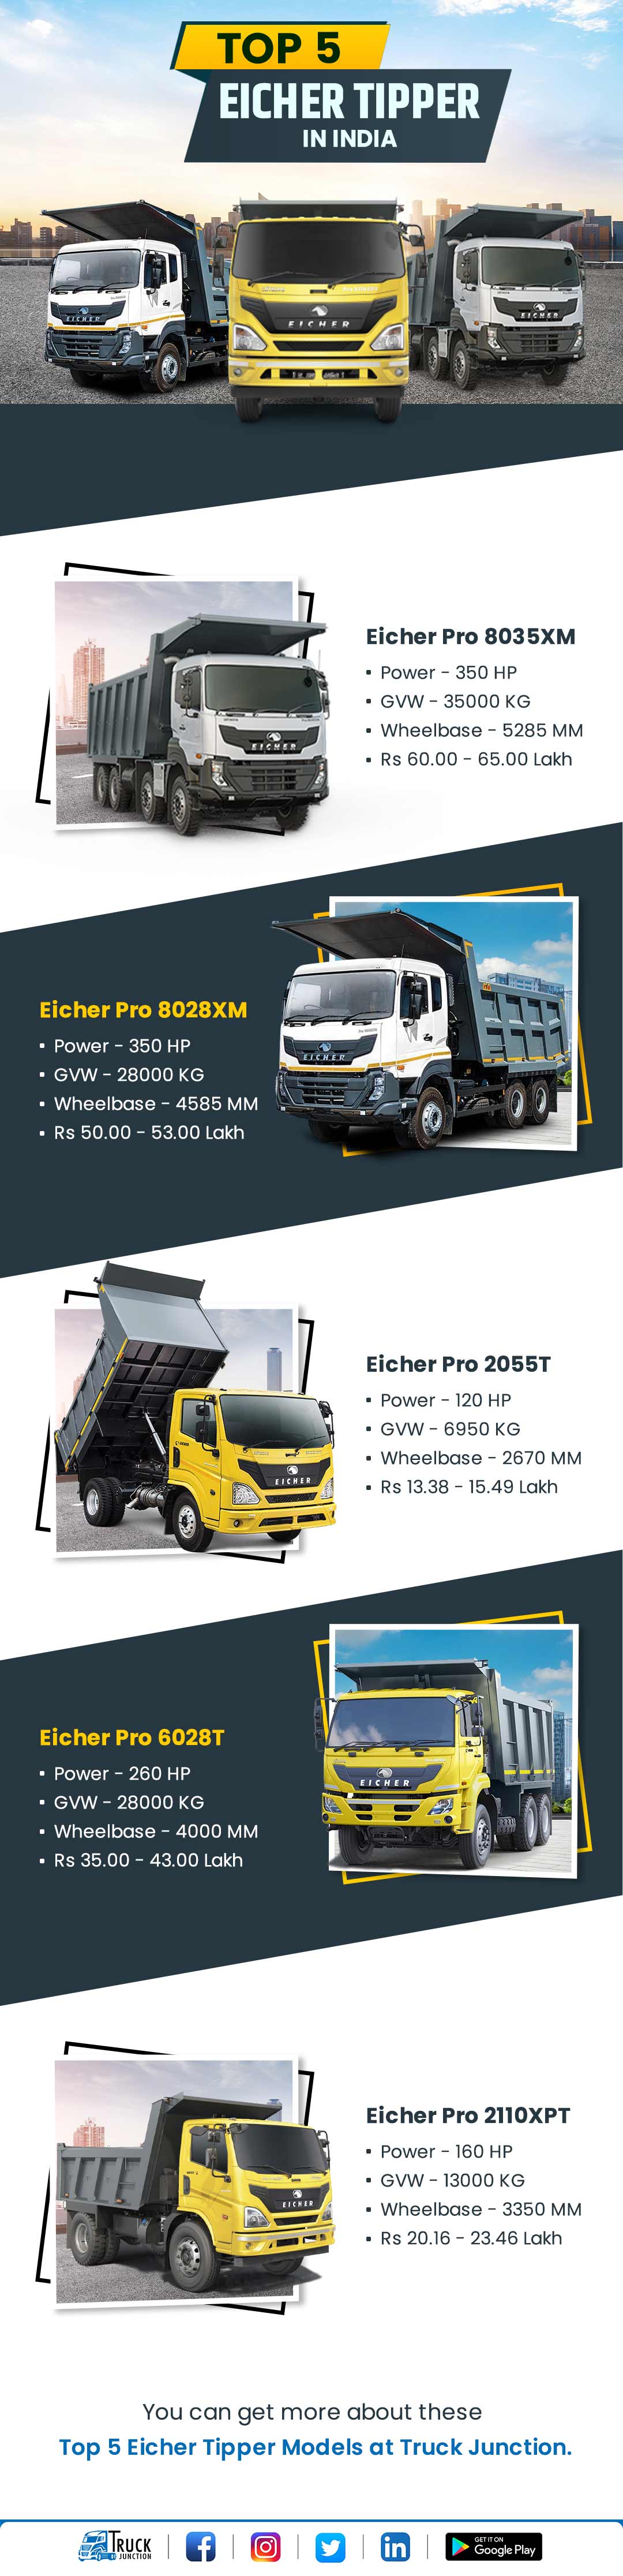 Top 5 Eicher Tipper Models In India Infographic